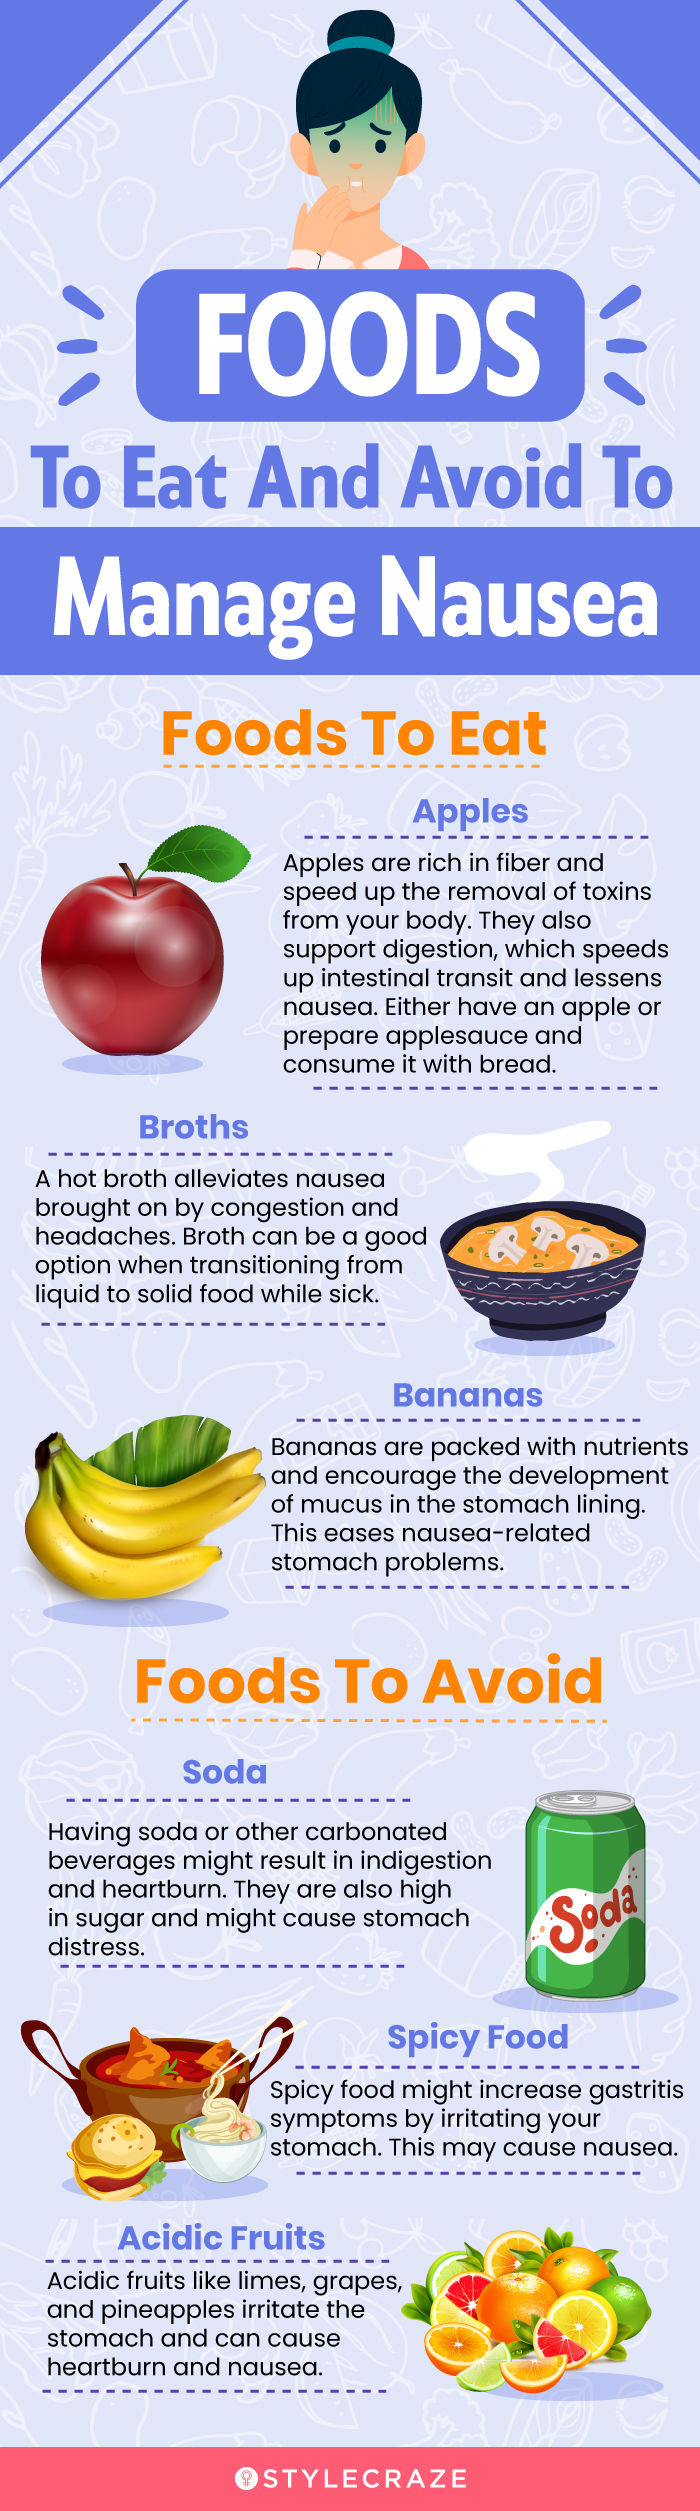 foods to eat and avoid to manage nausea (infographic)